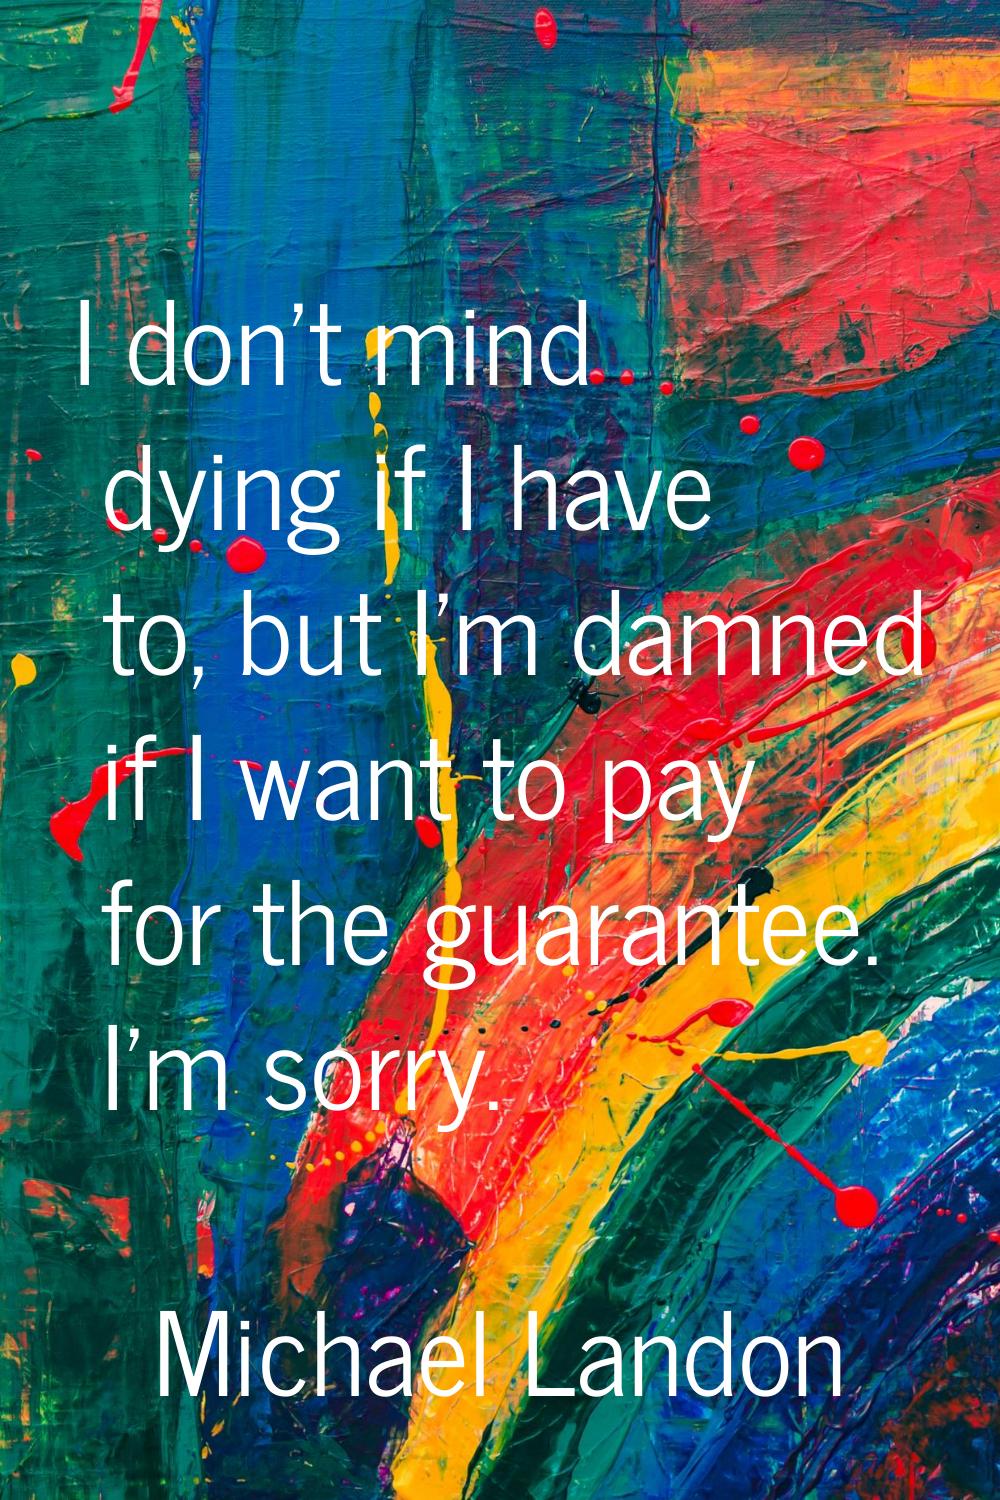 I don't mind dying if I have to, but I'm damned if I want to pay for the guarantee. I'm sorry.